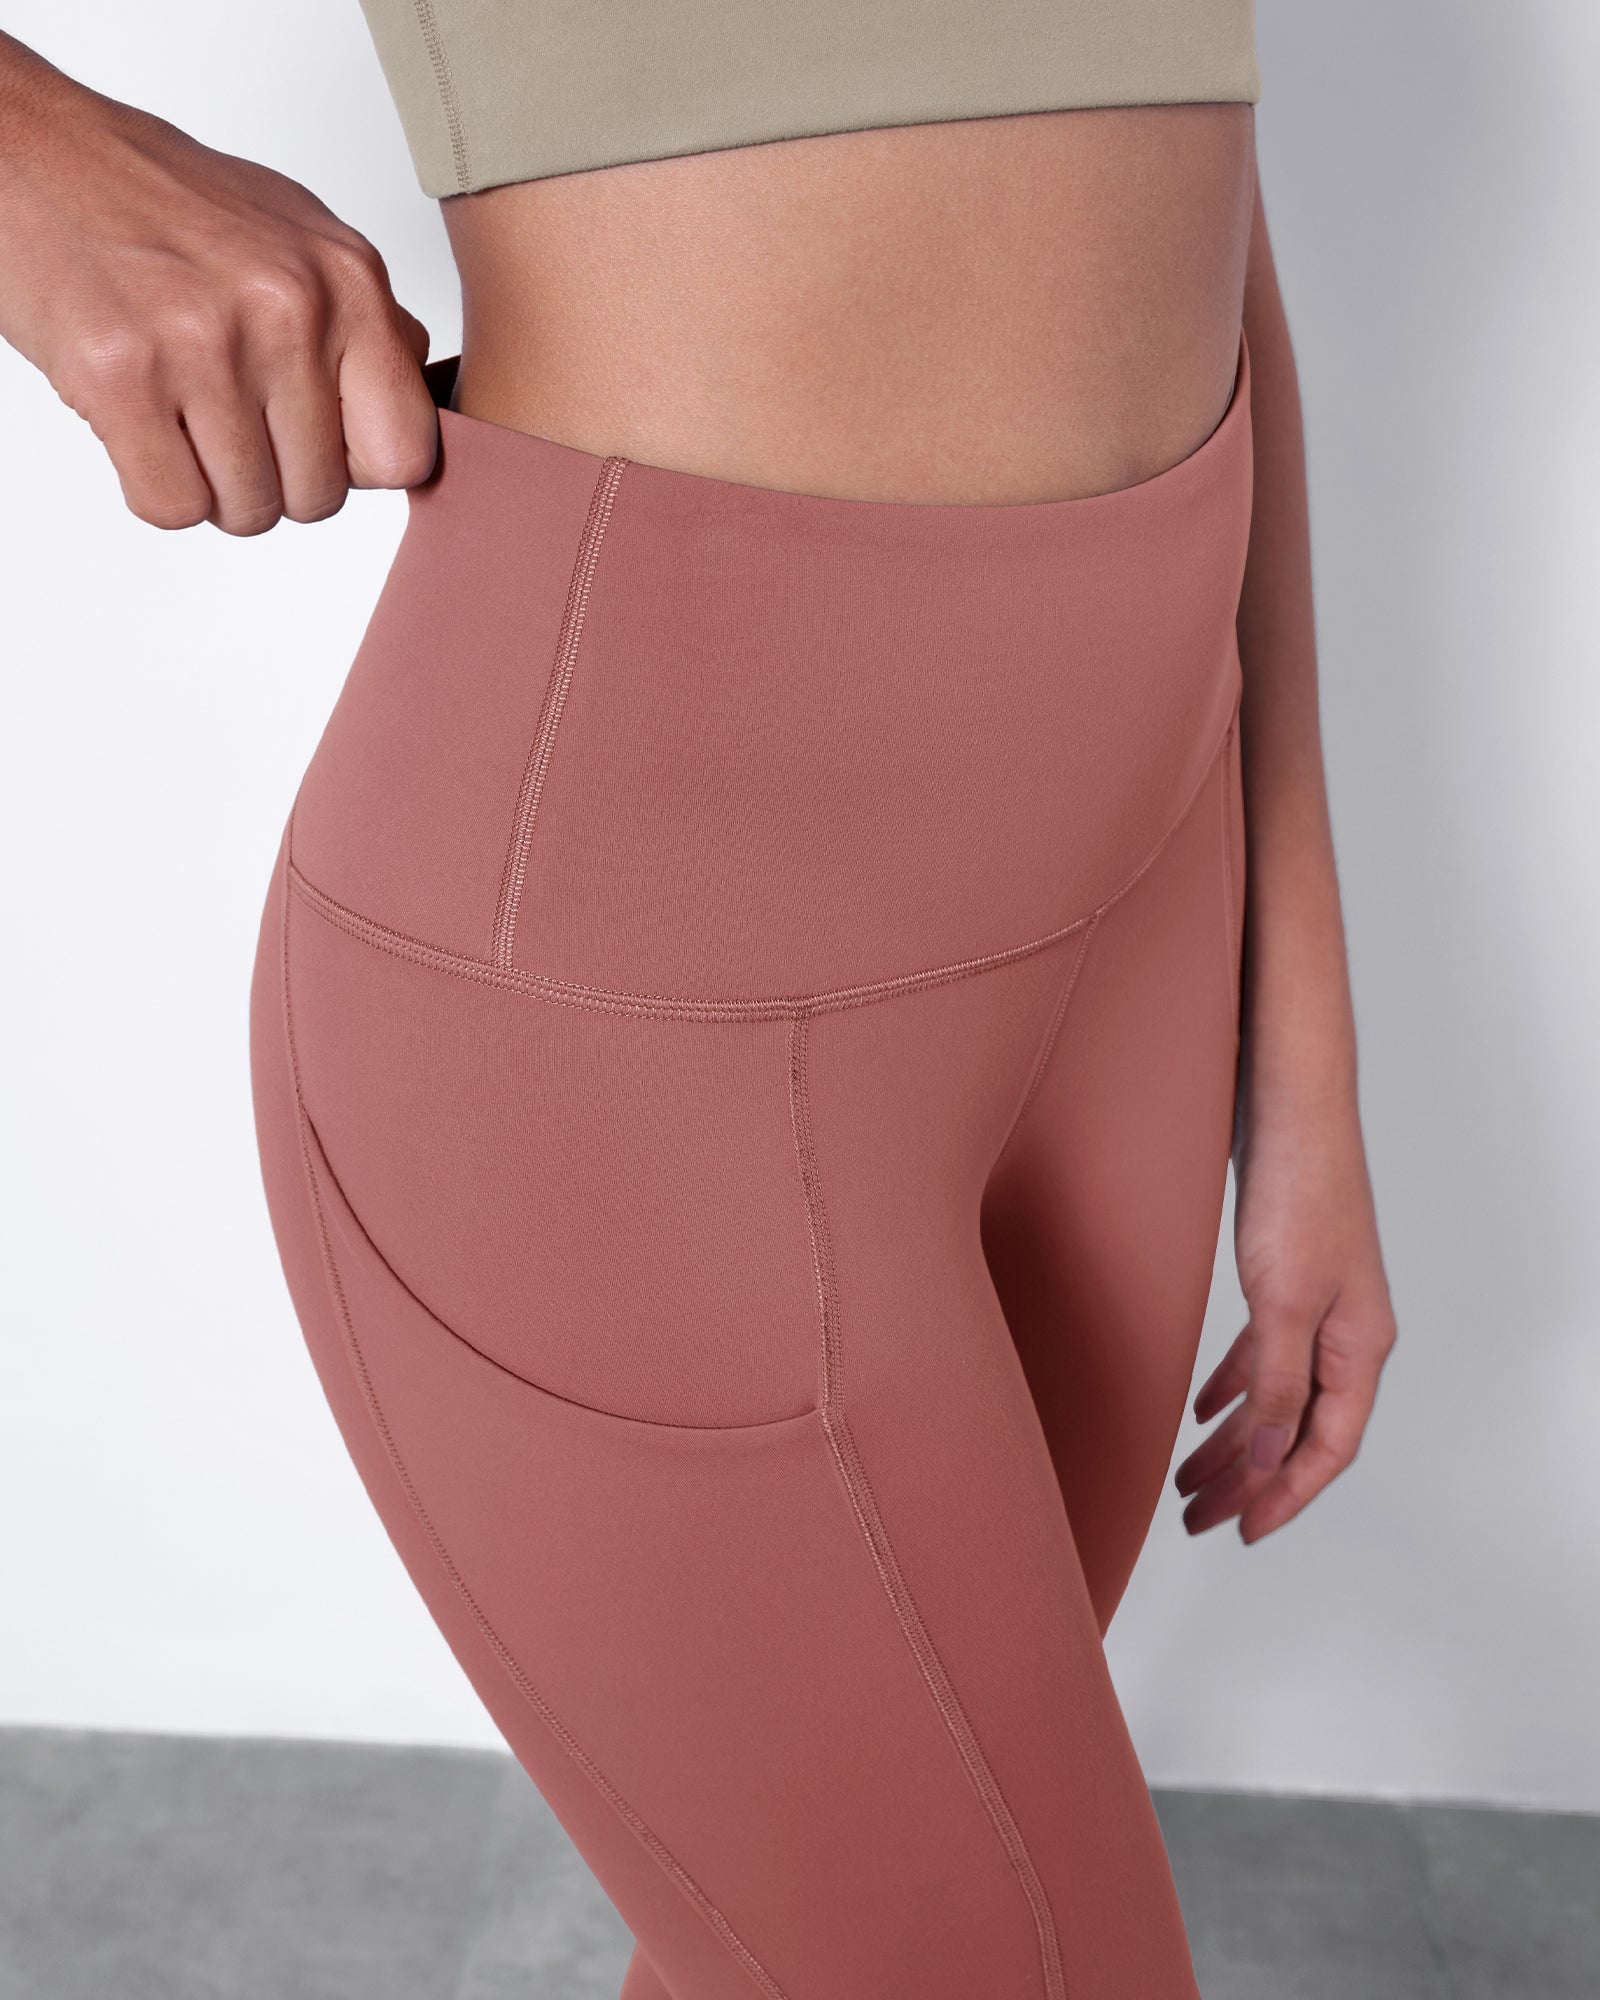 ODODOS Women's Leggings, Pants, Shorts, Skirts for Every Occasion